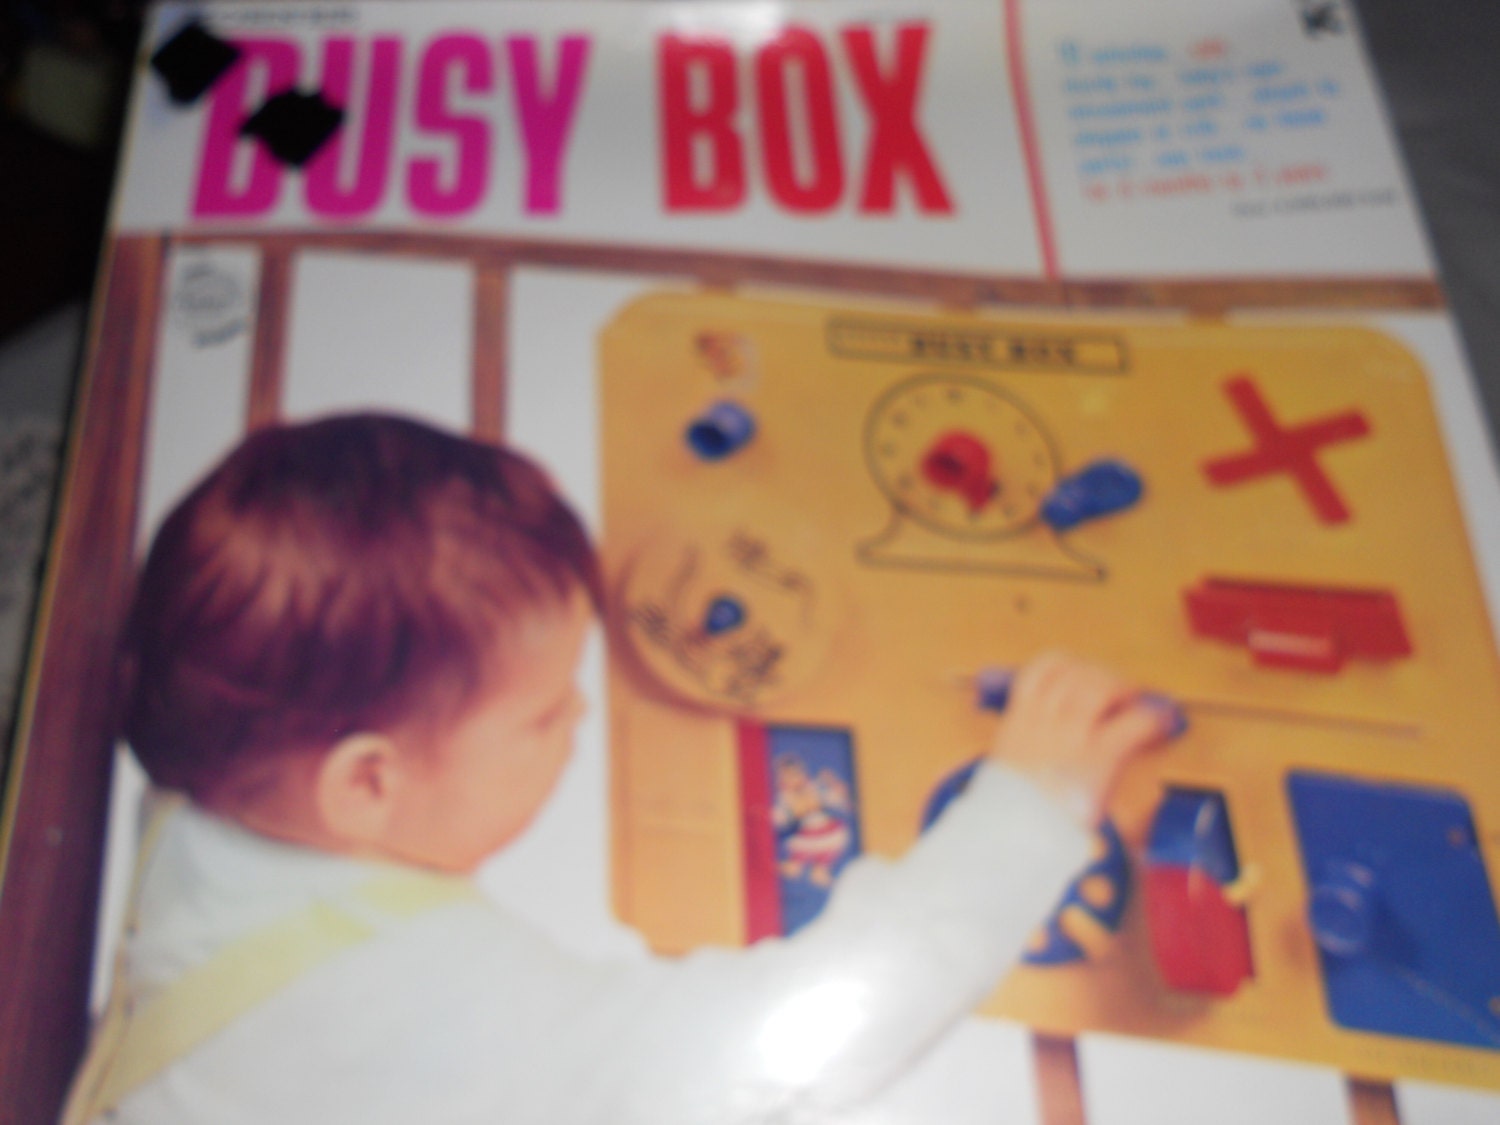 Vintage Busy Box Crib Toy & Box, Classic Kohler Toy from 1971, No. 605